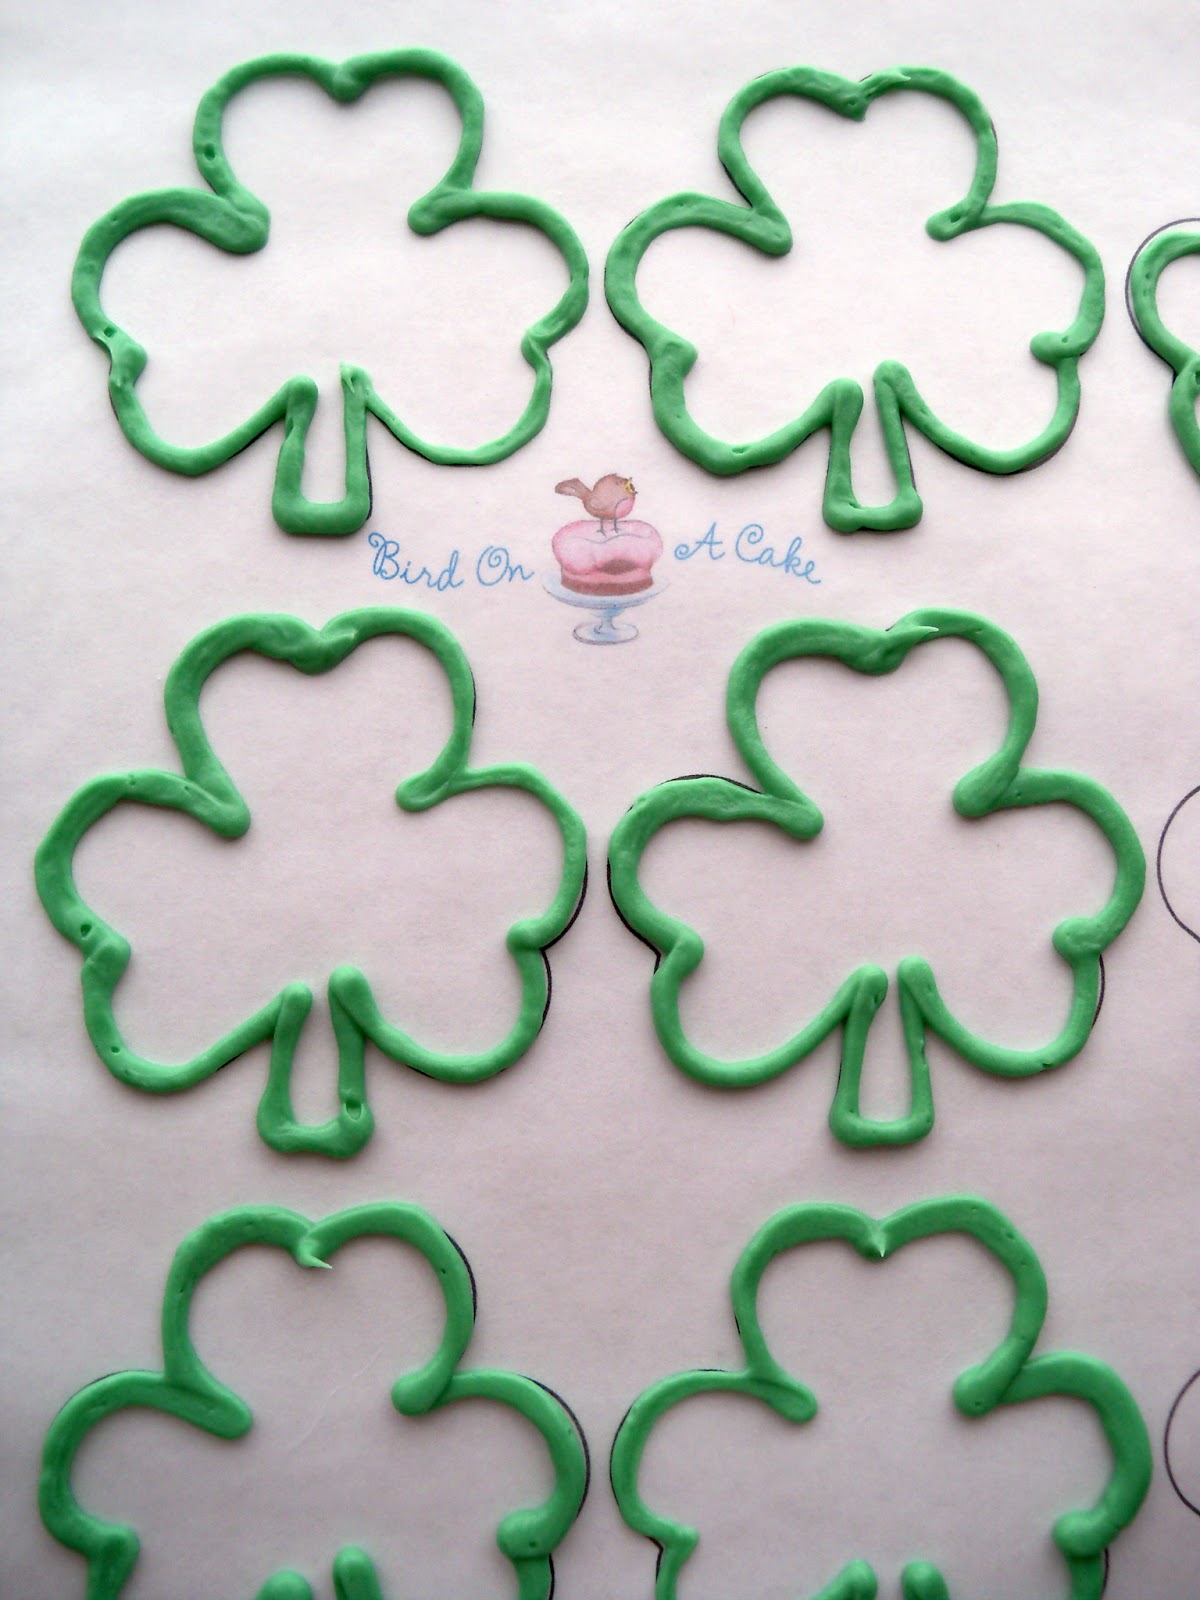 Bird On A Cake: St. Patrick's Day Shamrock Cupcake Toppers